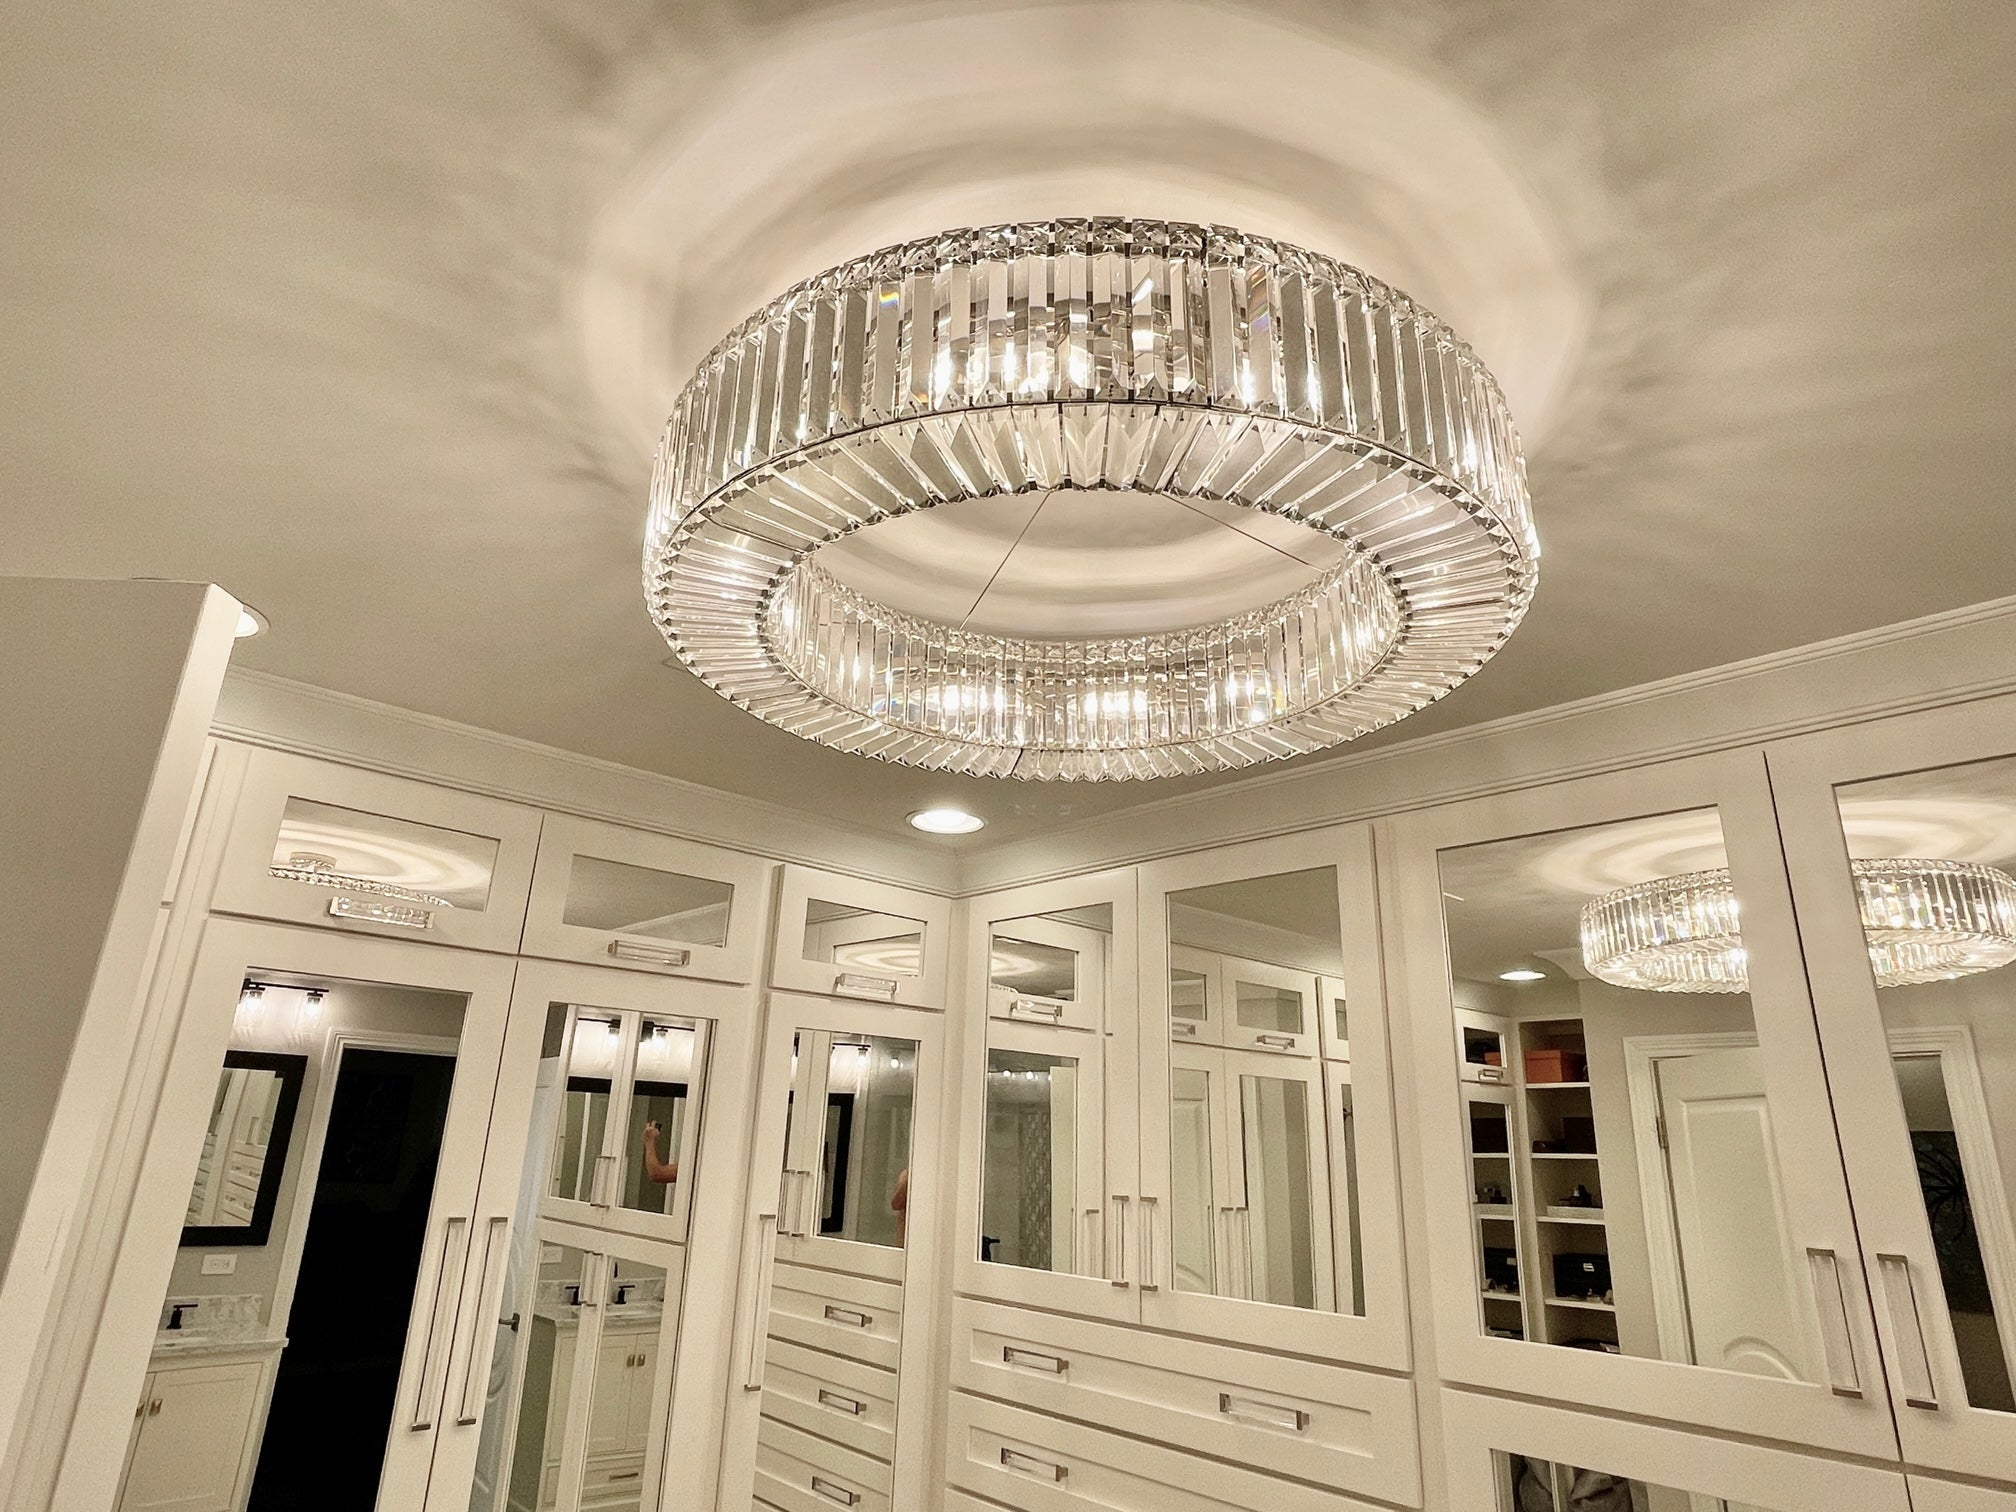 Jude Round Crystal Ring Chandelier - Italian Concept